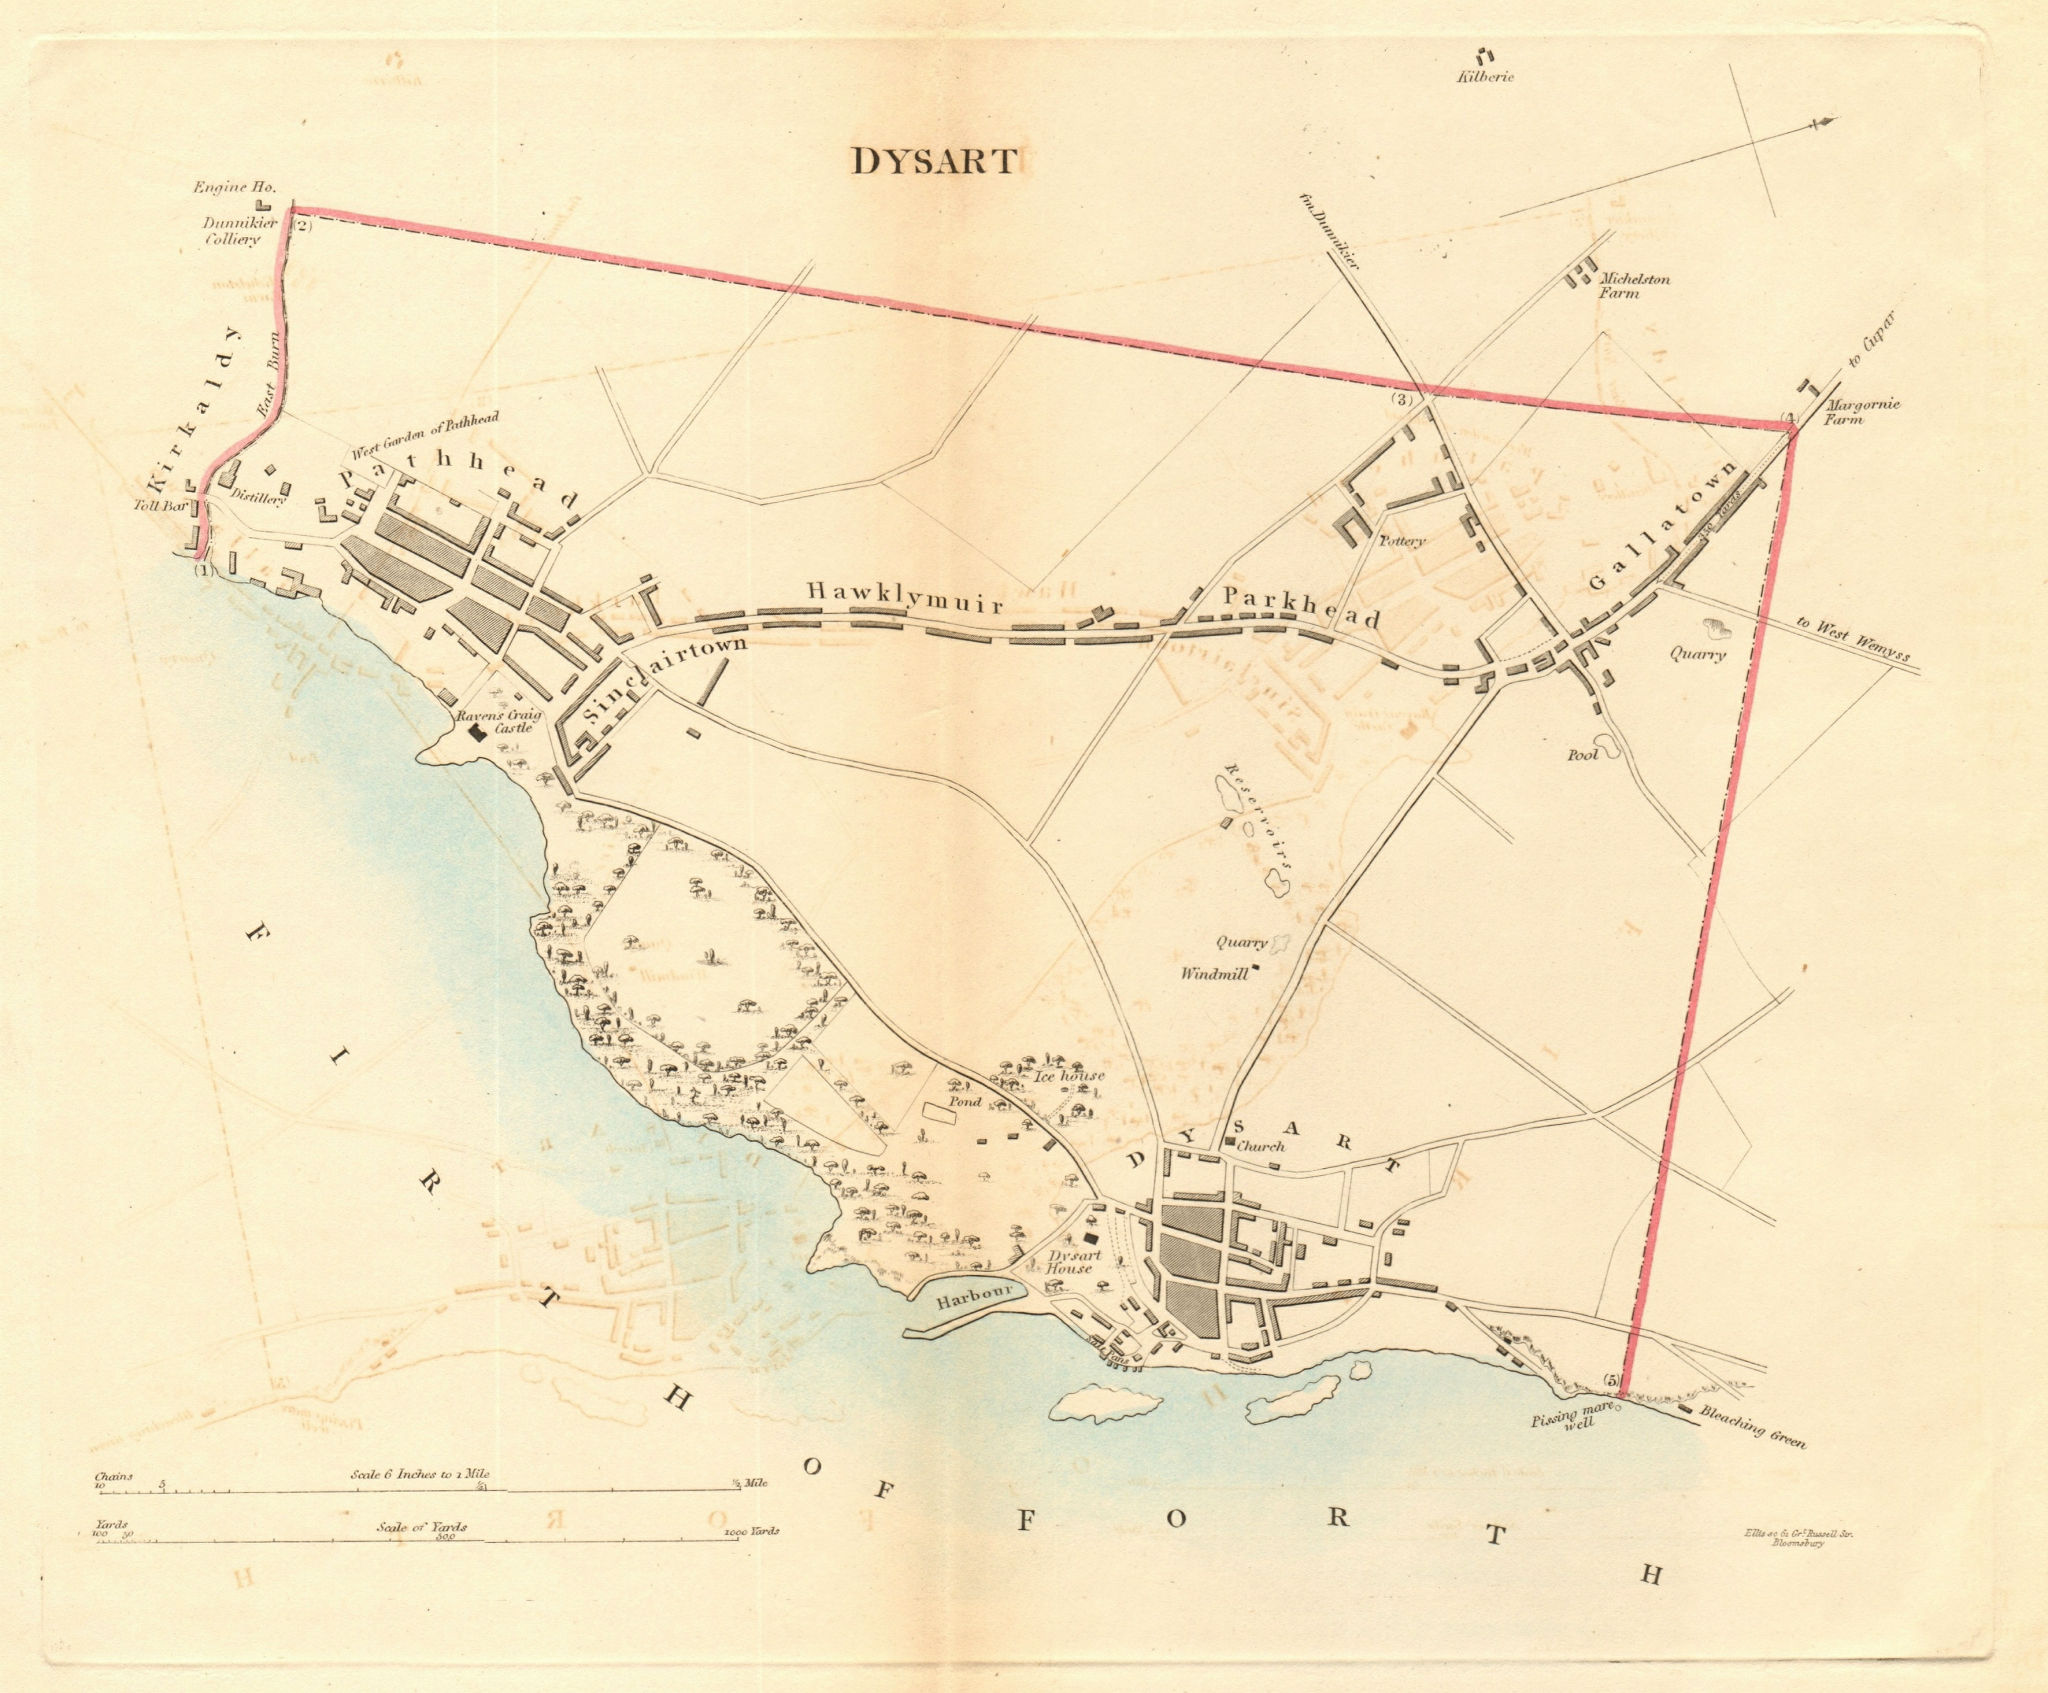 Associate Product DYSART borough/town plan for the REFORM ACT. Pathhead Kirkaldy Scotland 1832 map